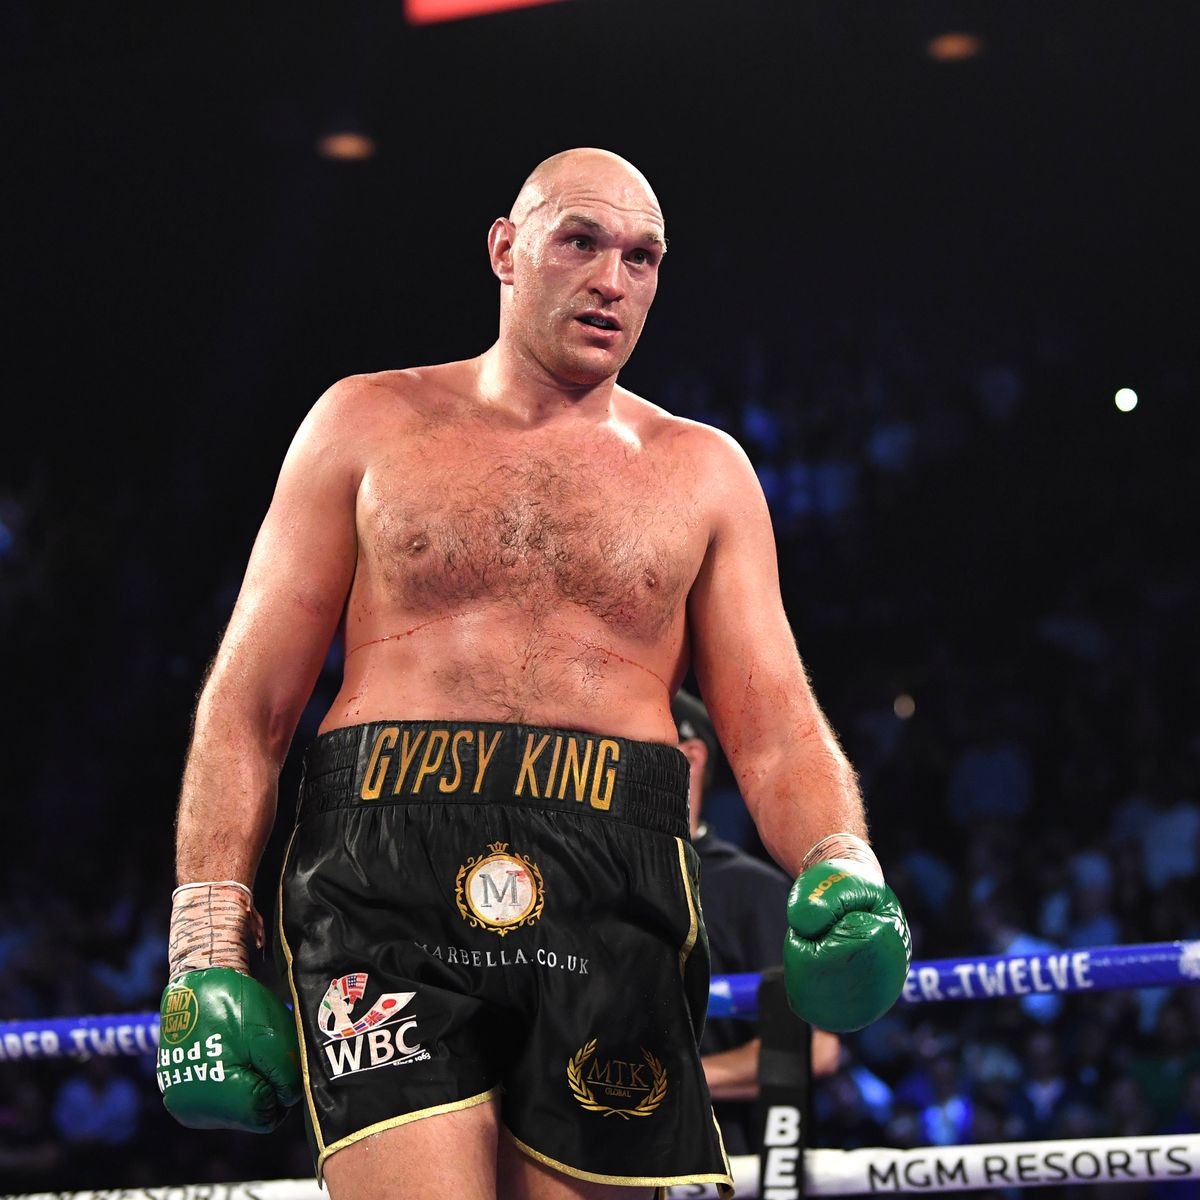 Tyson Fury rejects second Covid-19 jab due to concerns about sickness ahead of Deontay Wilder trilogy bout